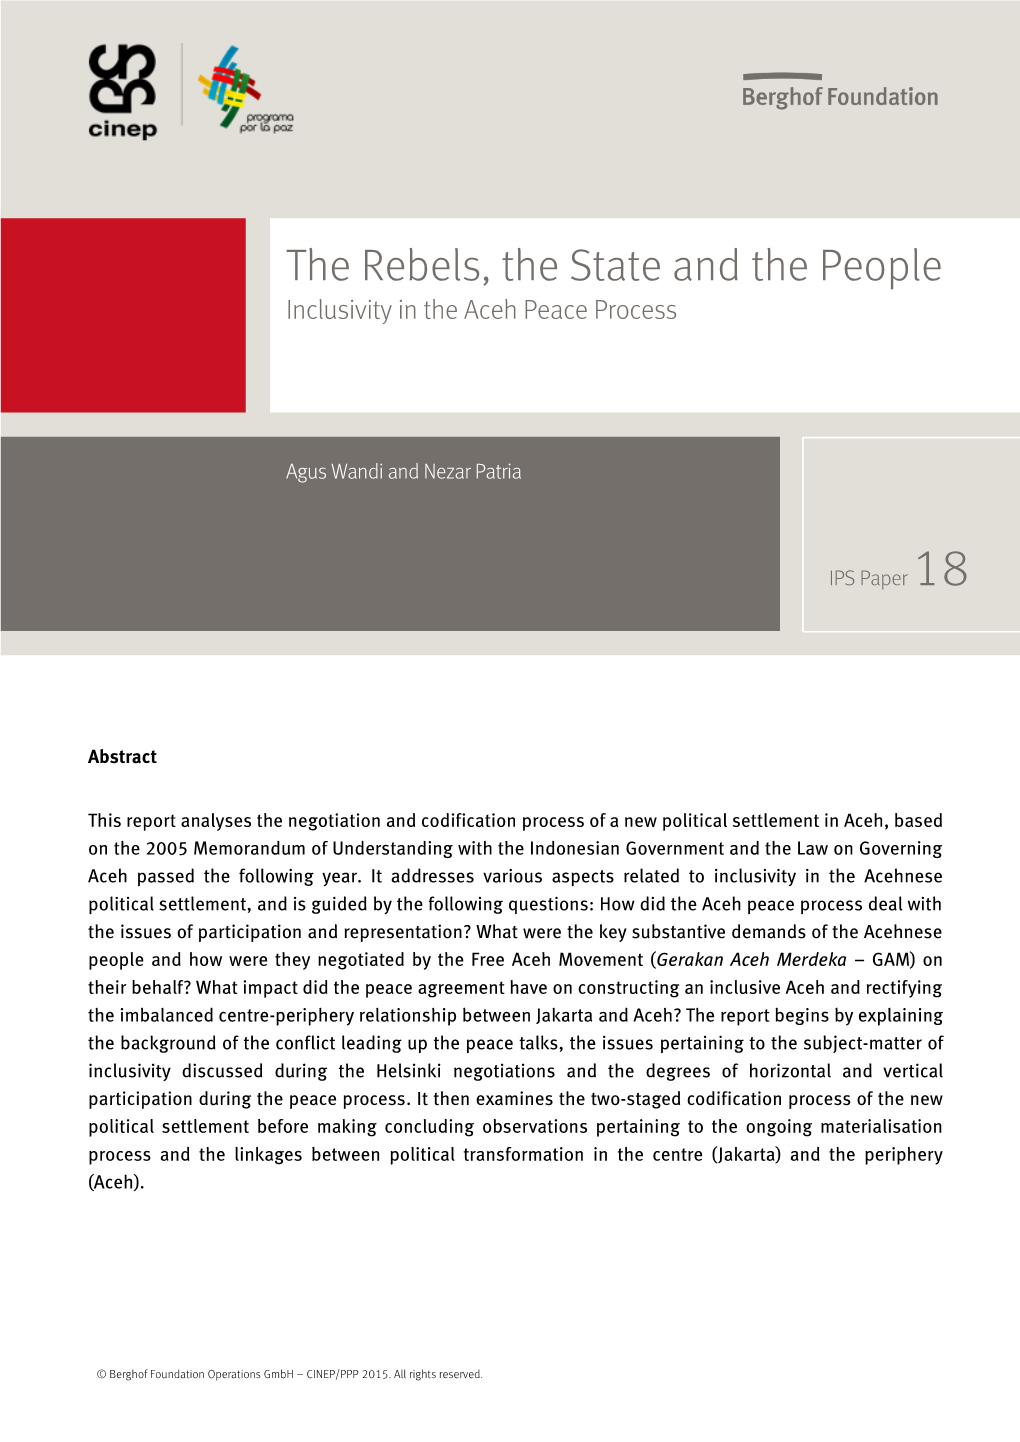 The Rebels, the State and the People Inclusivity in the Aceh Peace Process